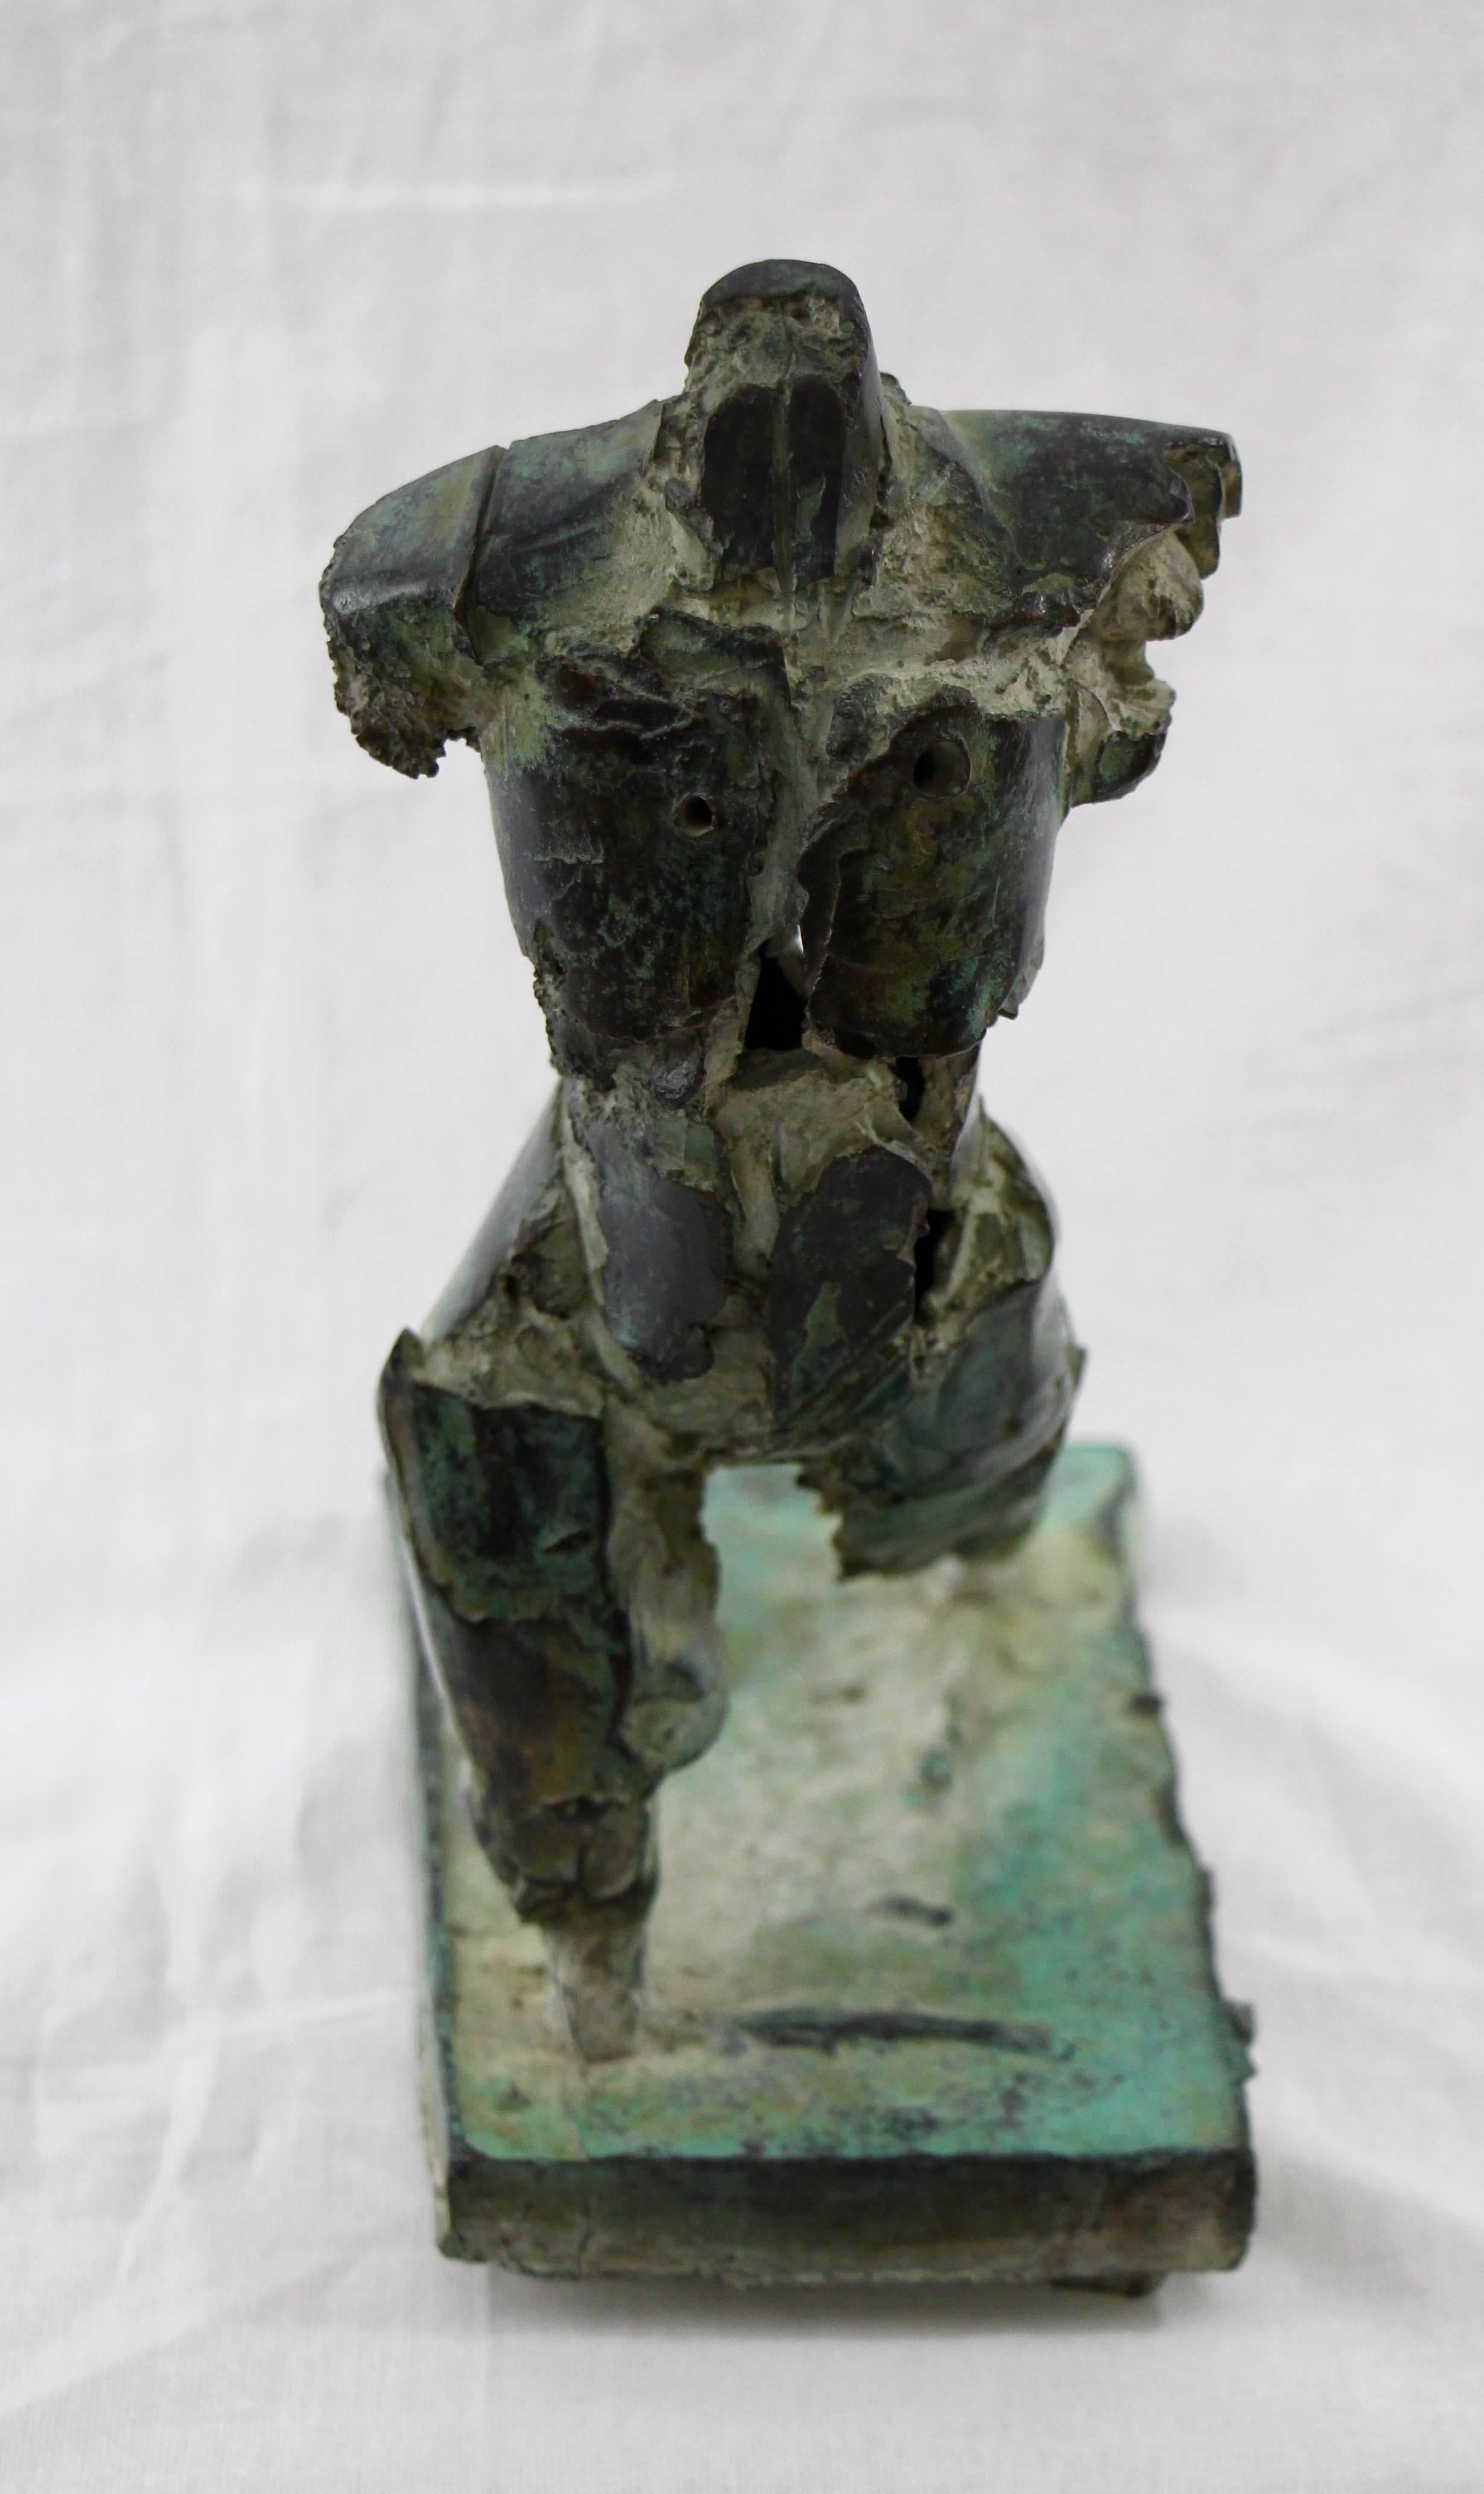 Henry Neuman (USA, 20th century), abstract Brutalist bronze sculpture of walking figure, signed and dated 1984.